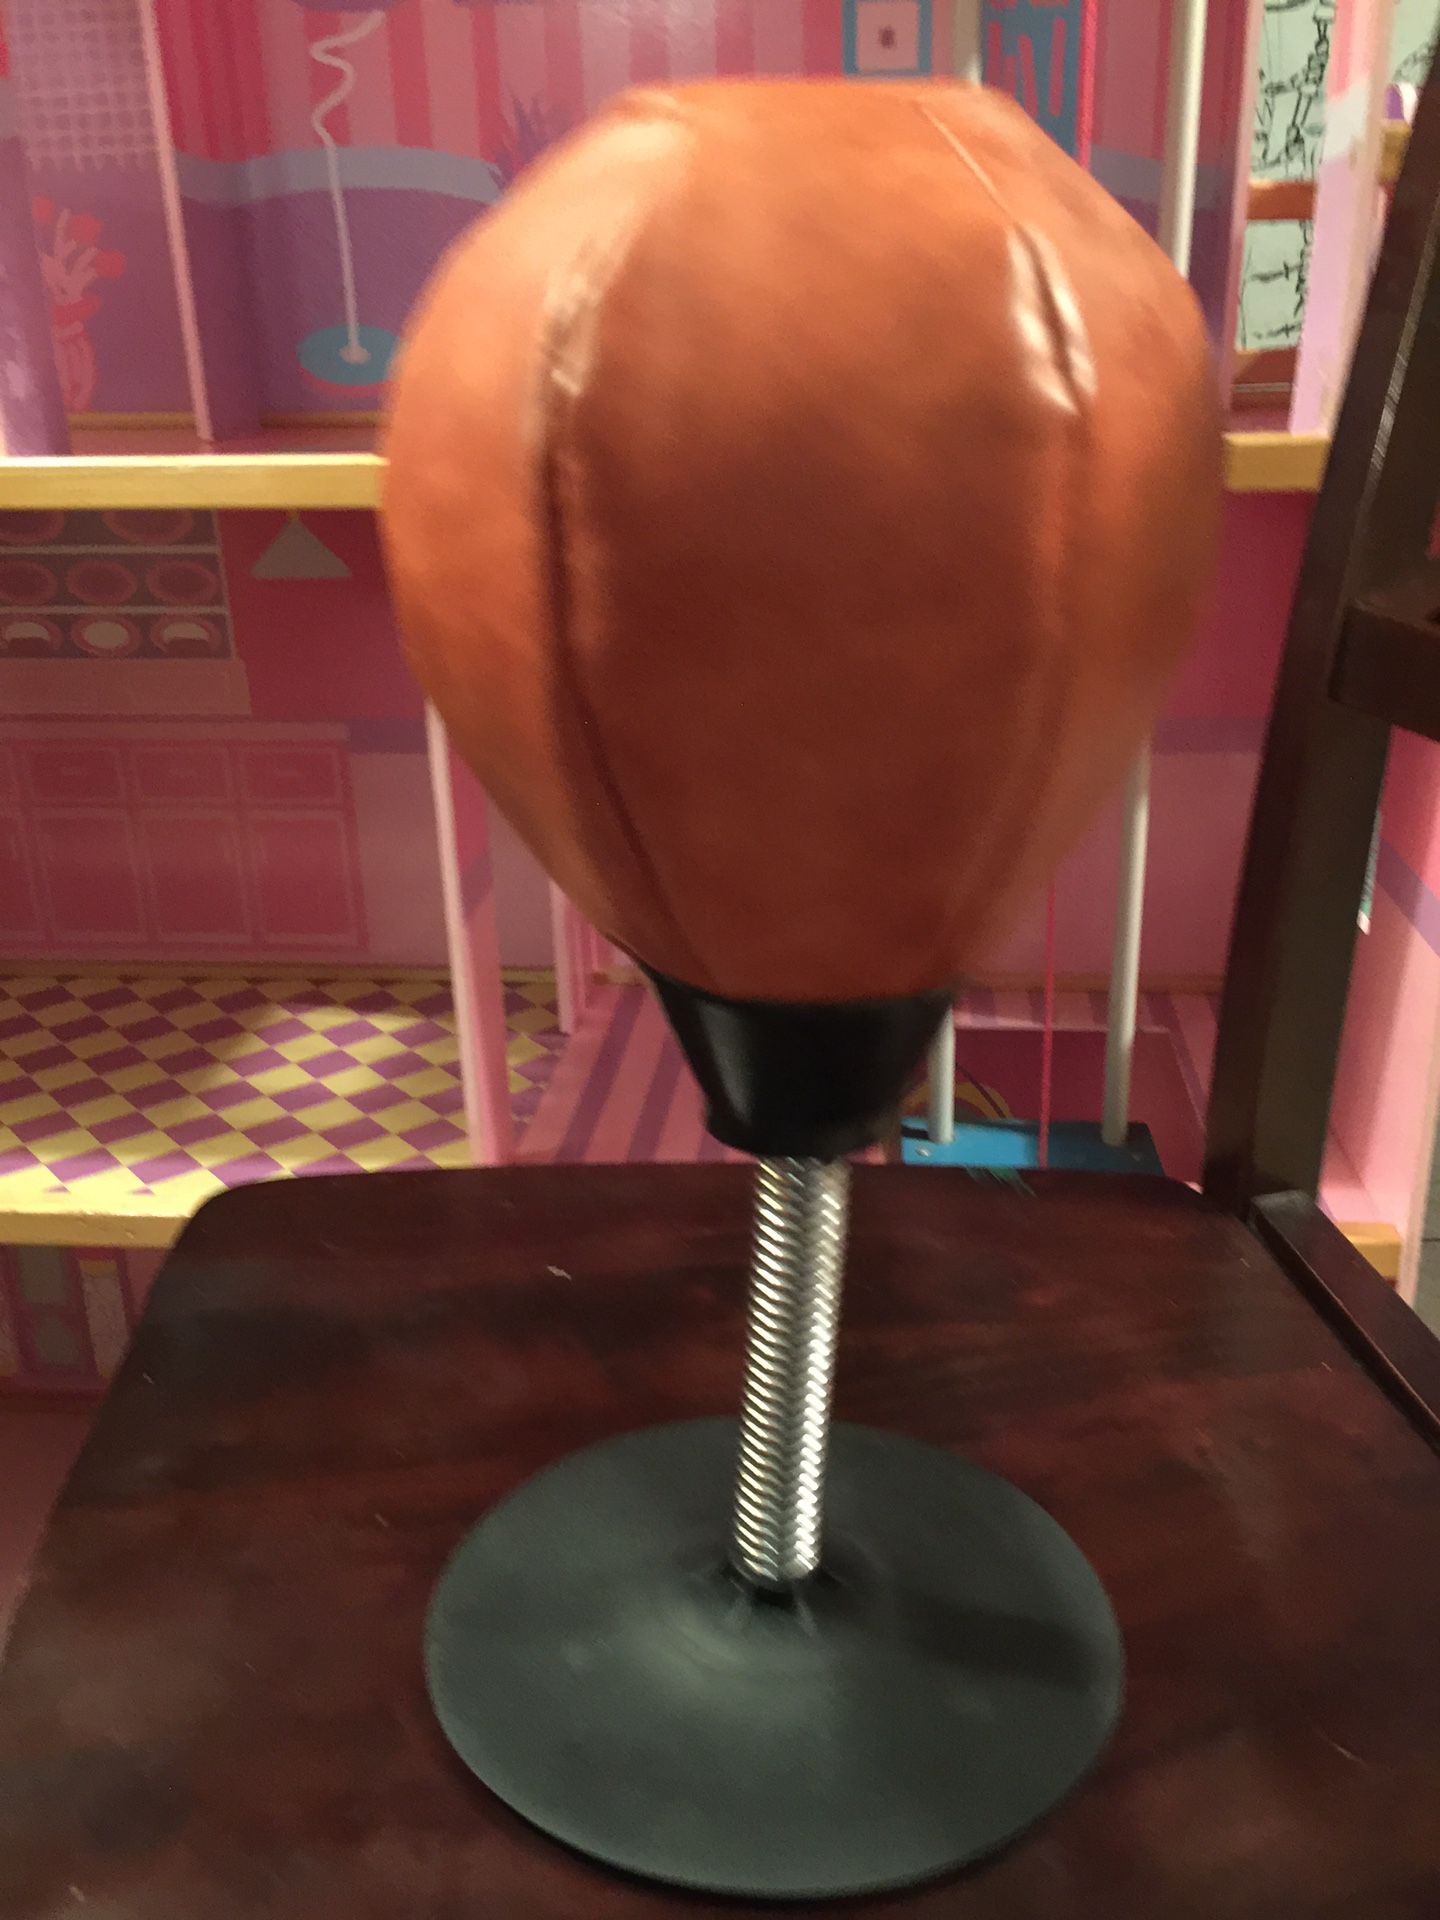 Suction cup punching speed bag, for desk top